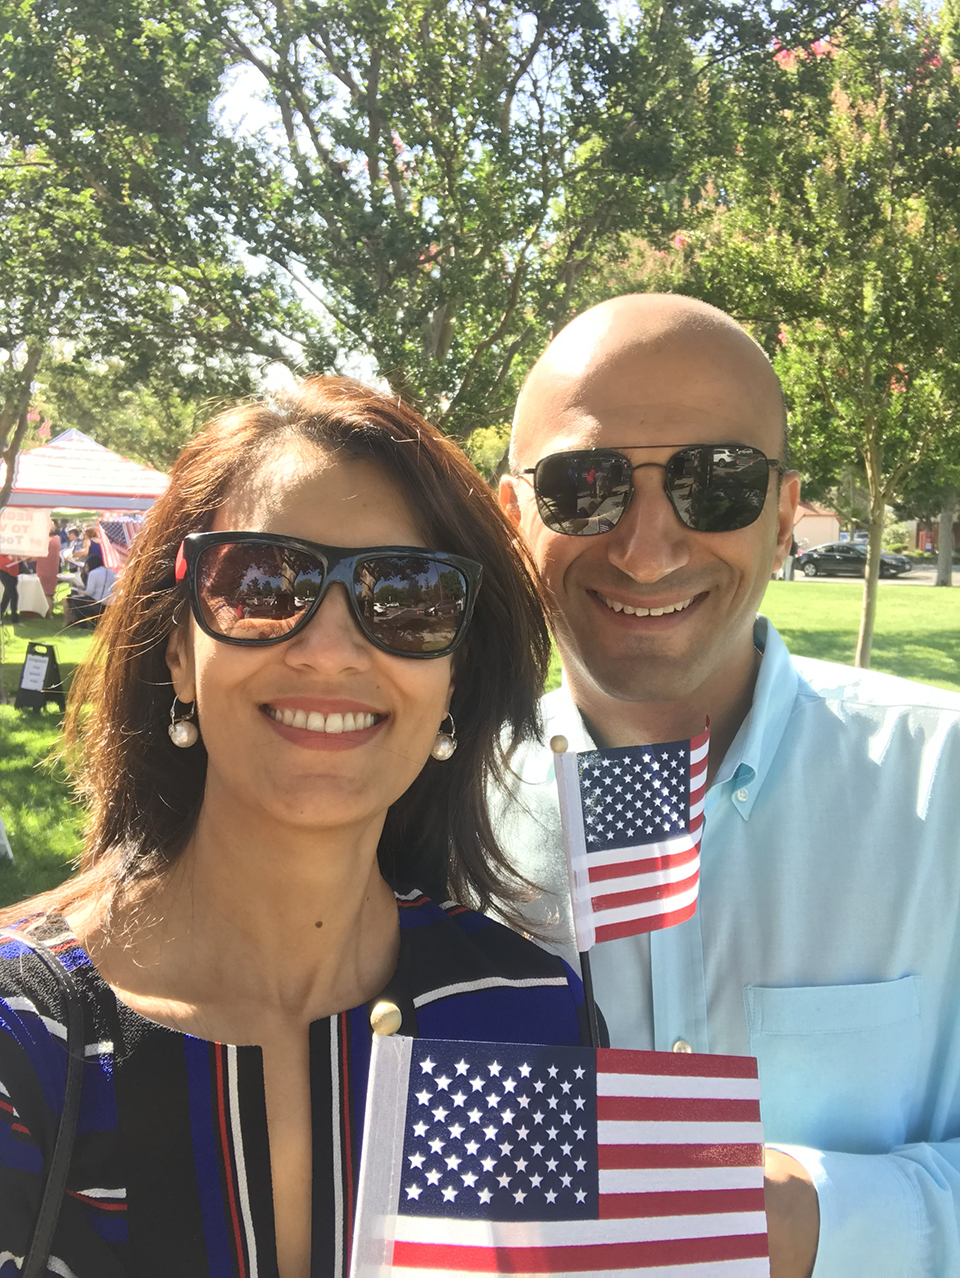 A man and a woman take a photo outside while holding American flags.